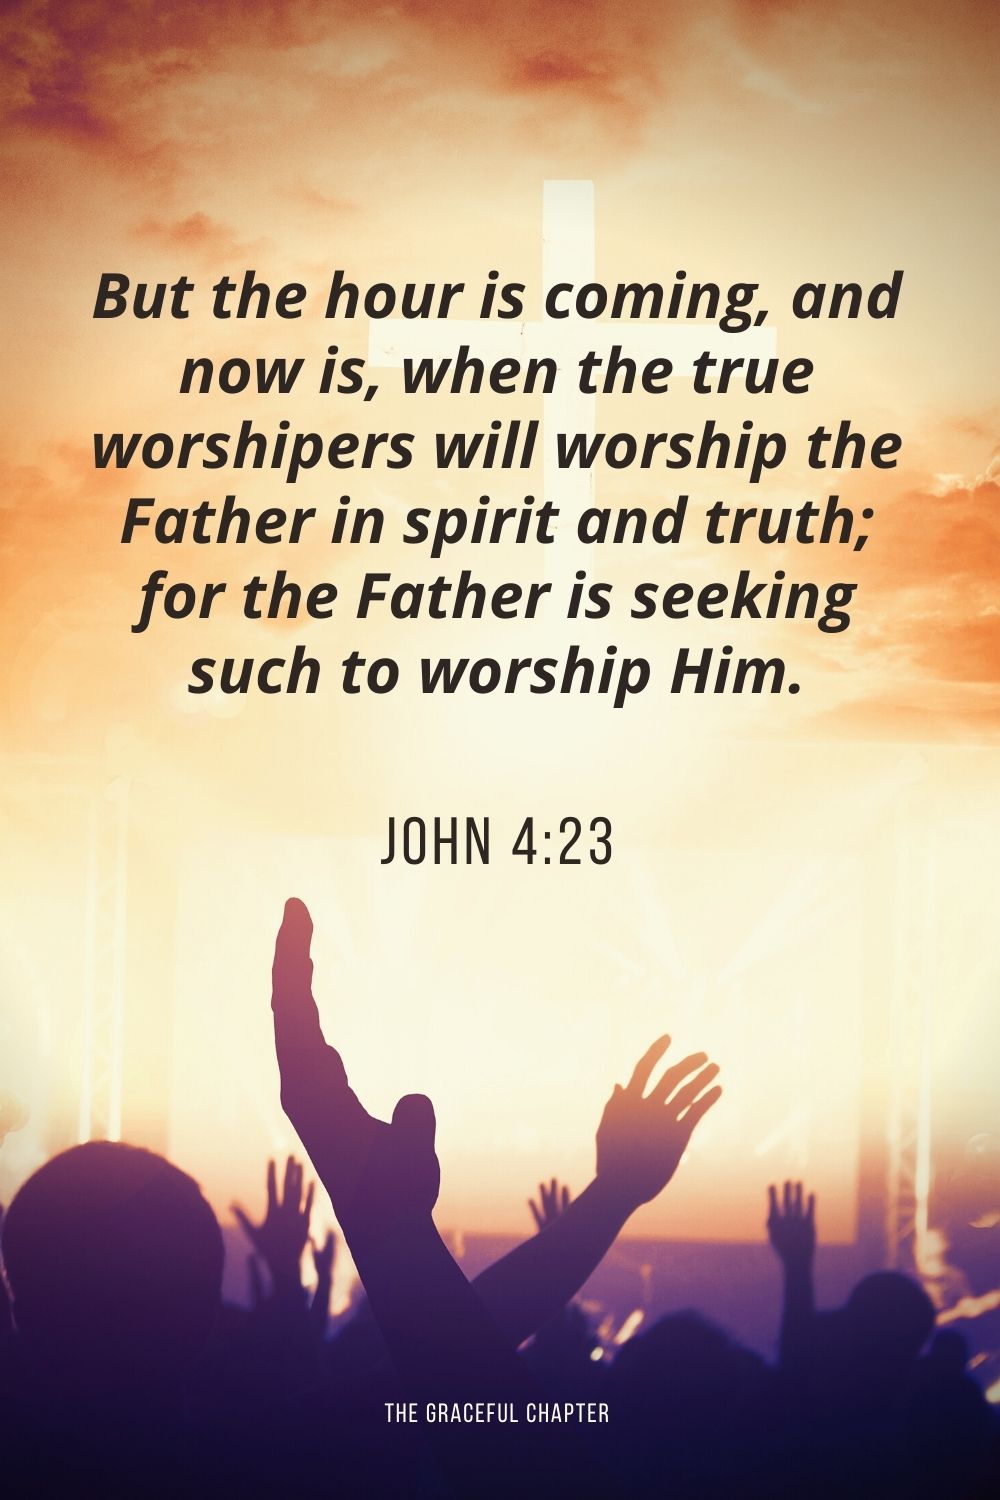 But the hour is coming, and now is, when the true worshipers will worship the Father in spirit and truth; for the Father is seeking such to worship Him. John 4:23